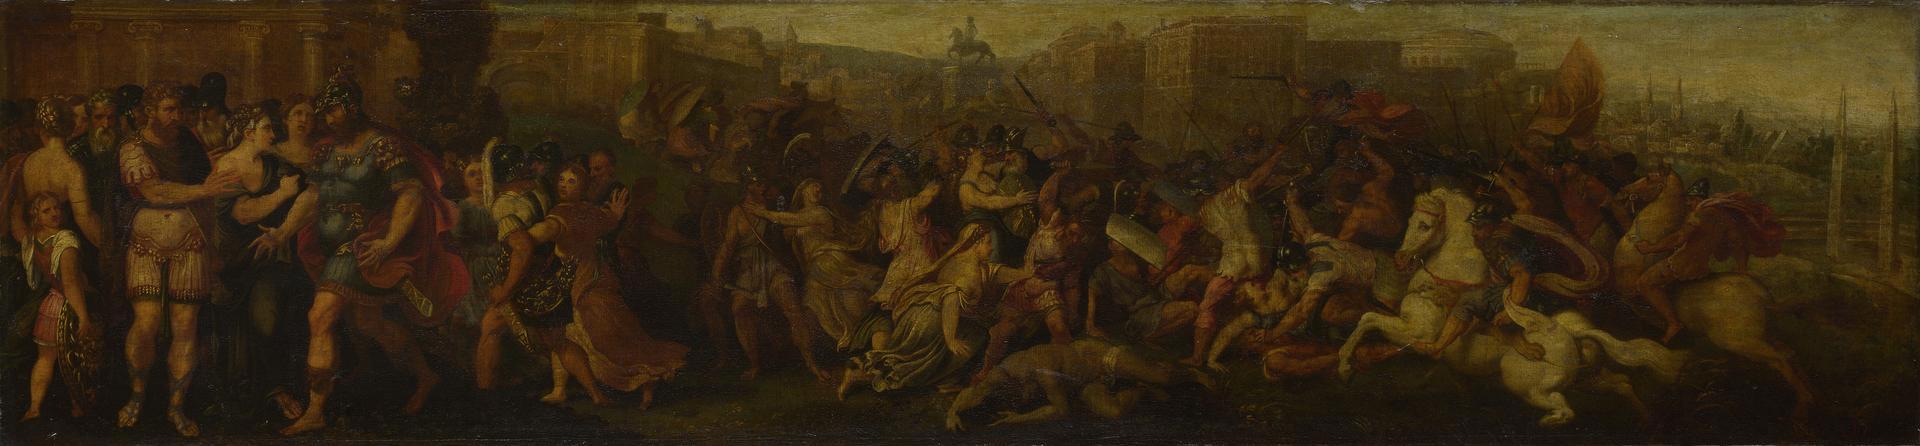 The Intervention of the Sabine Women by Giulio Licinio